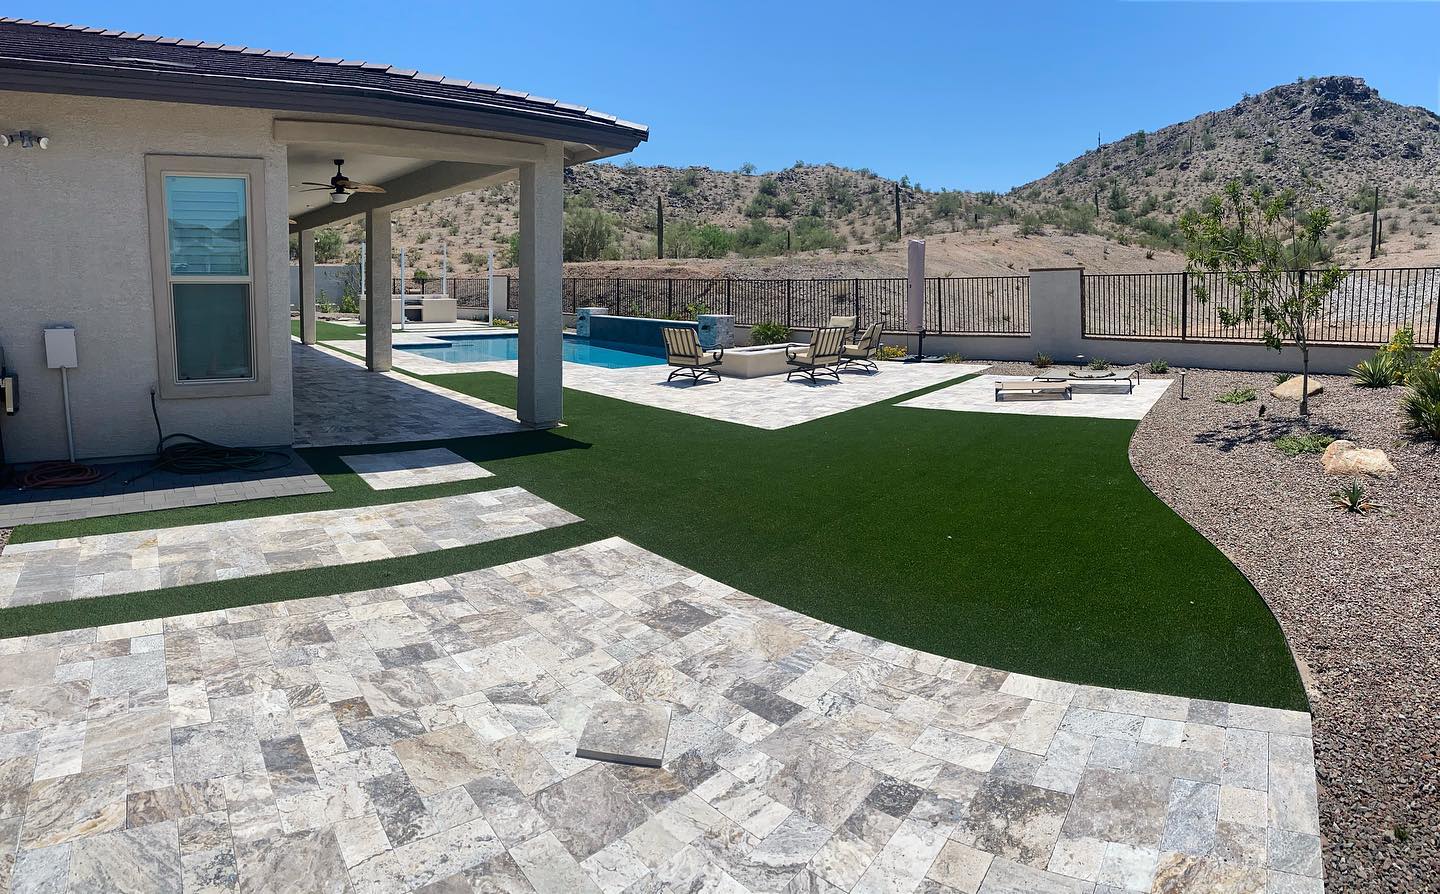 the unique patio pavement pattern gives the artificial grass an emphasis